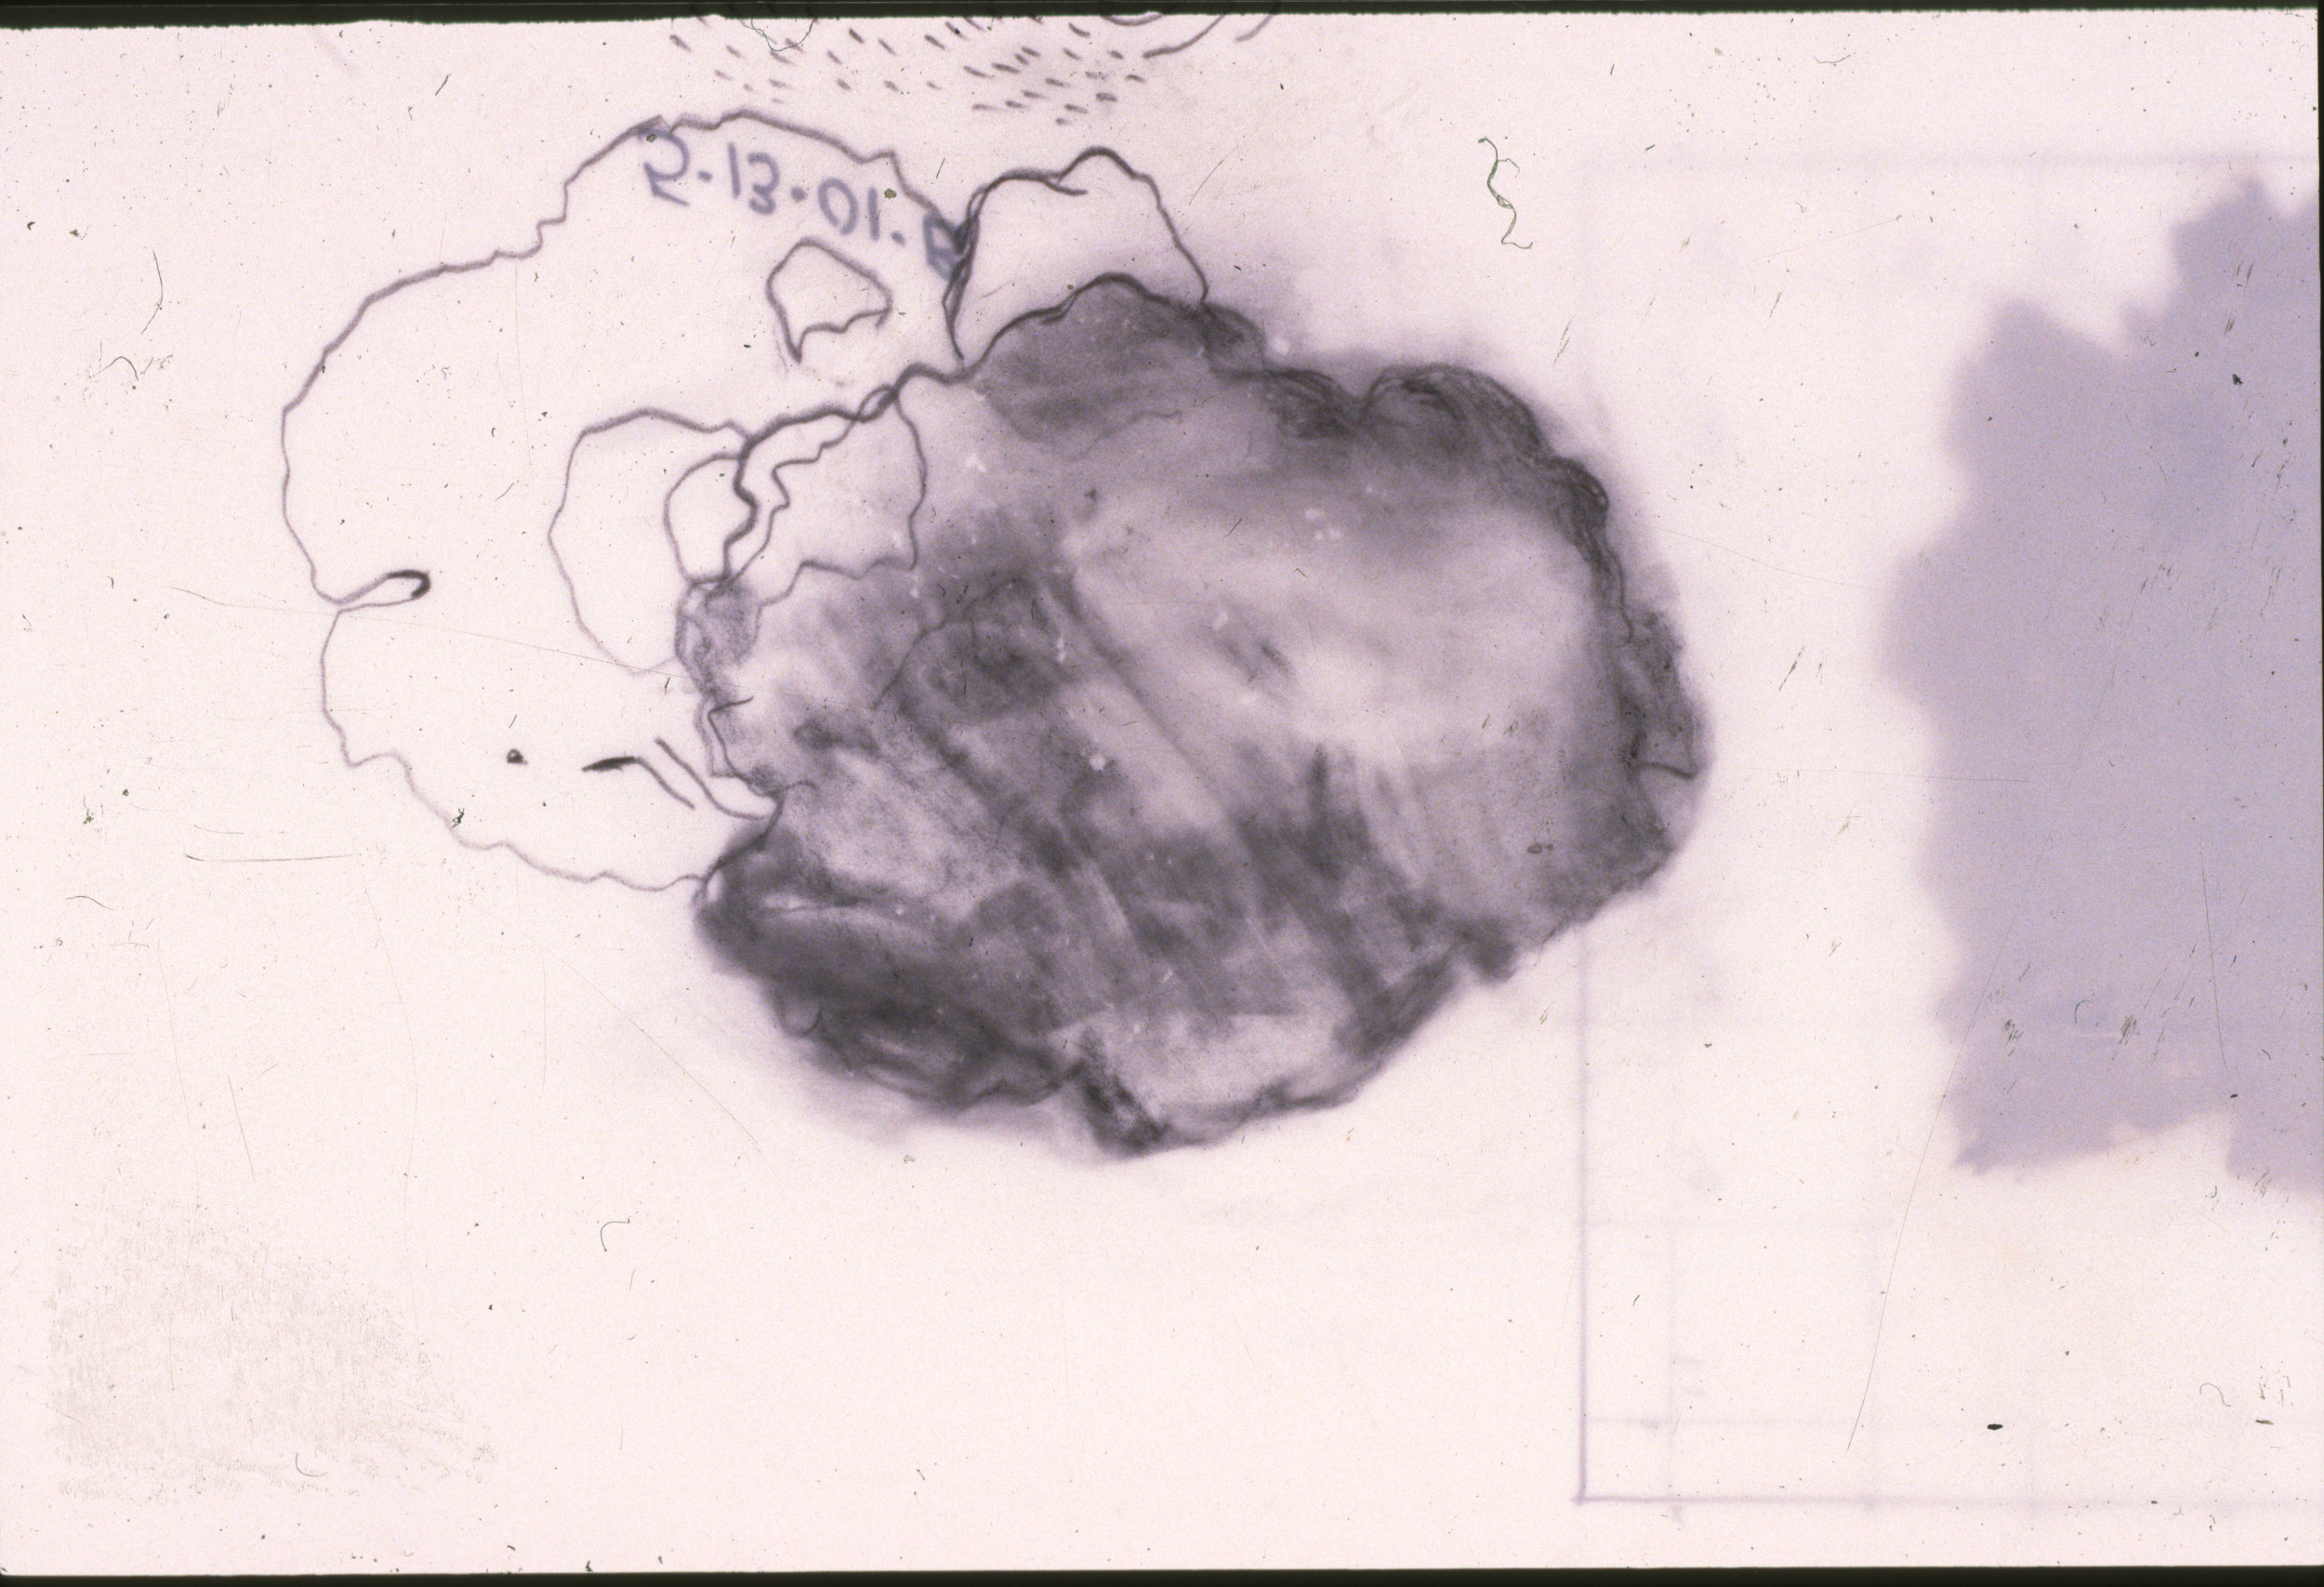 Mapping of Memories Series No. 2, graphite on Mylar, 9 x 12 inches, 2001